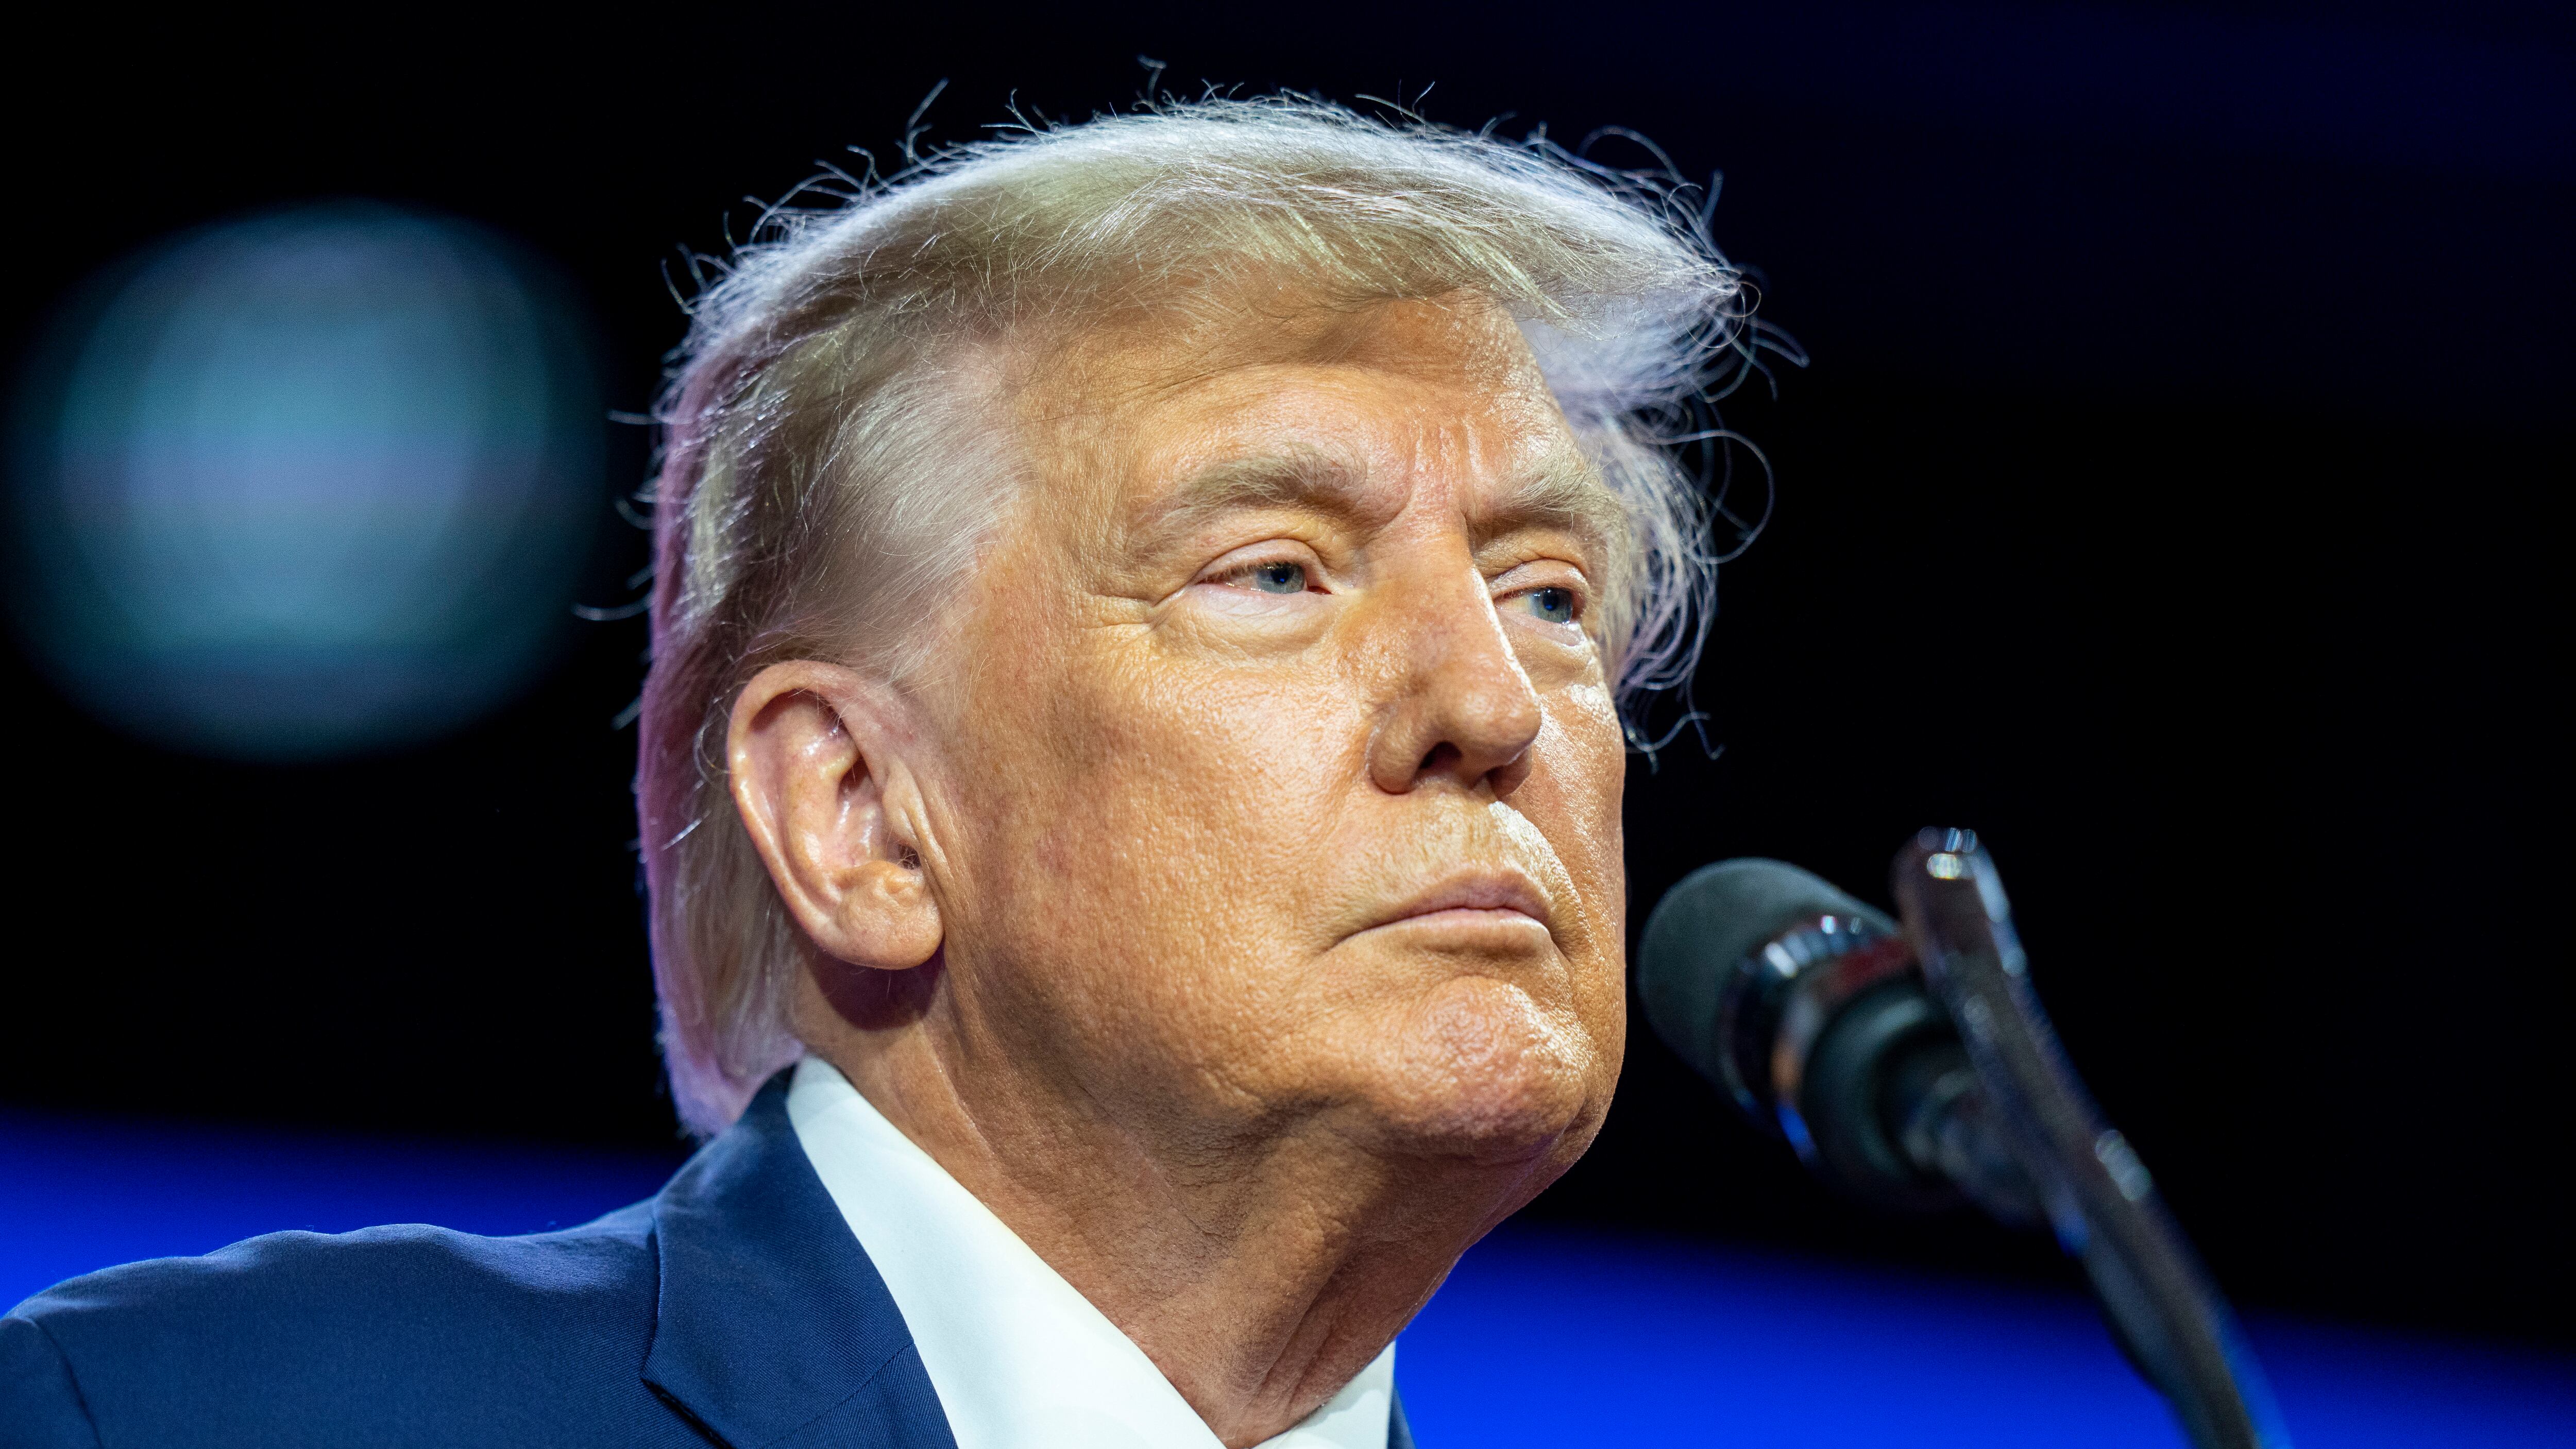 Former president Donald Trump can face trial on charges that he plotted to overturn the results of the 2020 election, the US appeals court said (Alex Brandon/AP)